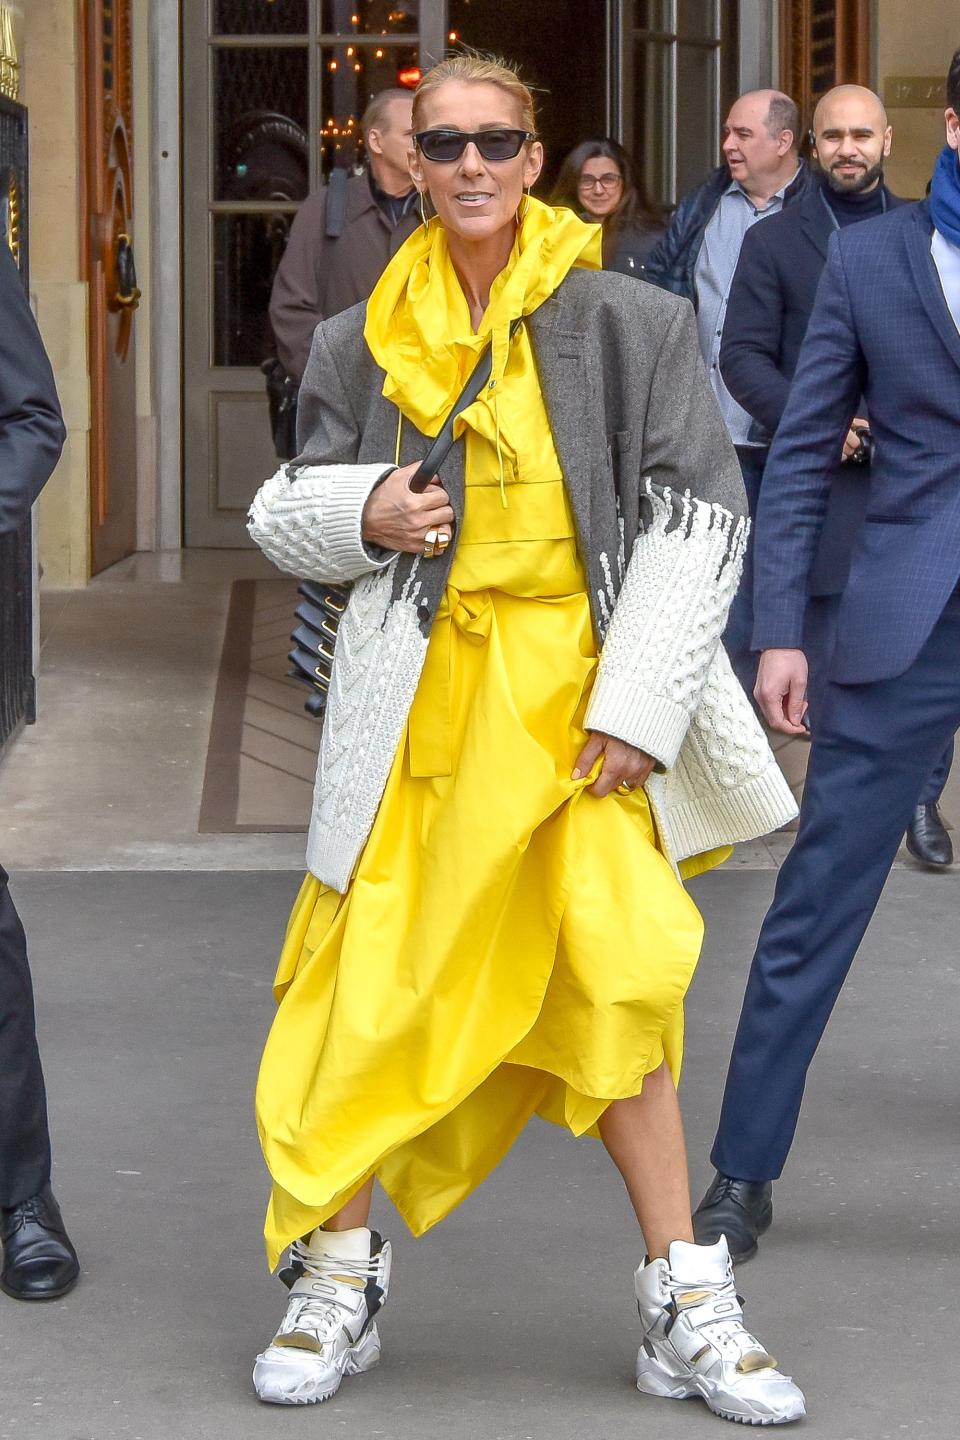 Celine in a yellow a-symmetrical raincoat dress under a grey and white knitted blazer. She's wearing sunglasses and white chunky sneakers.